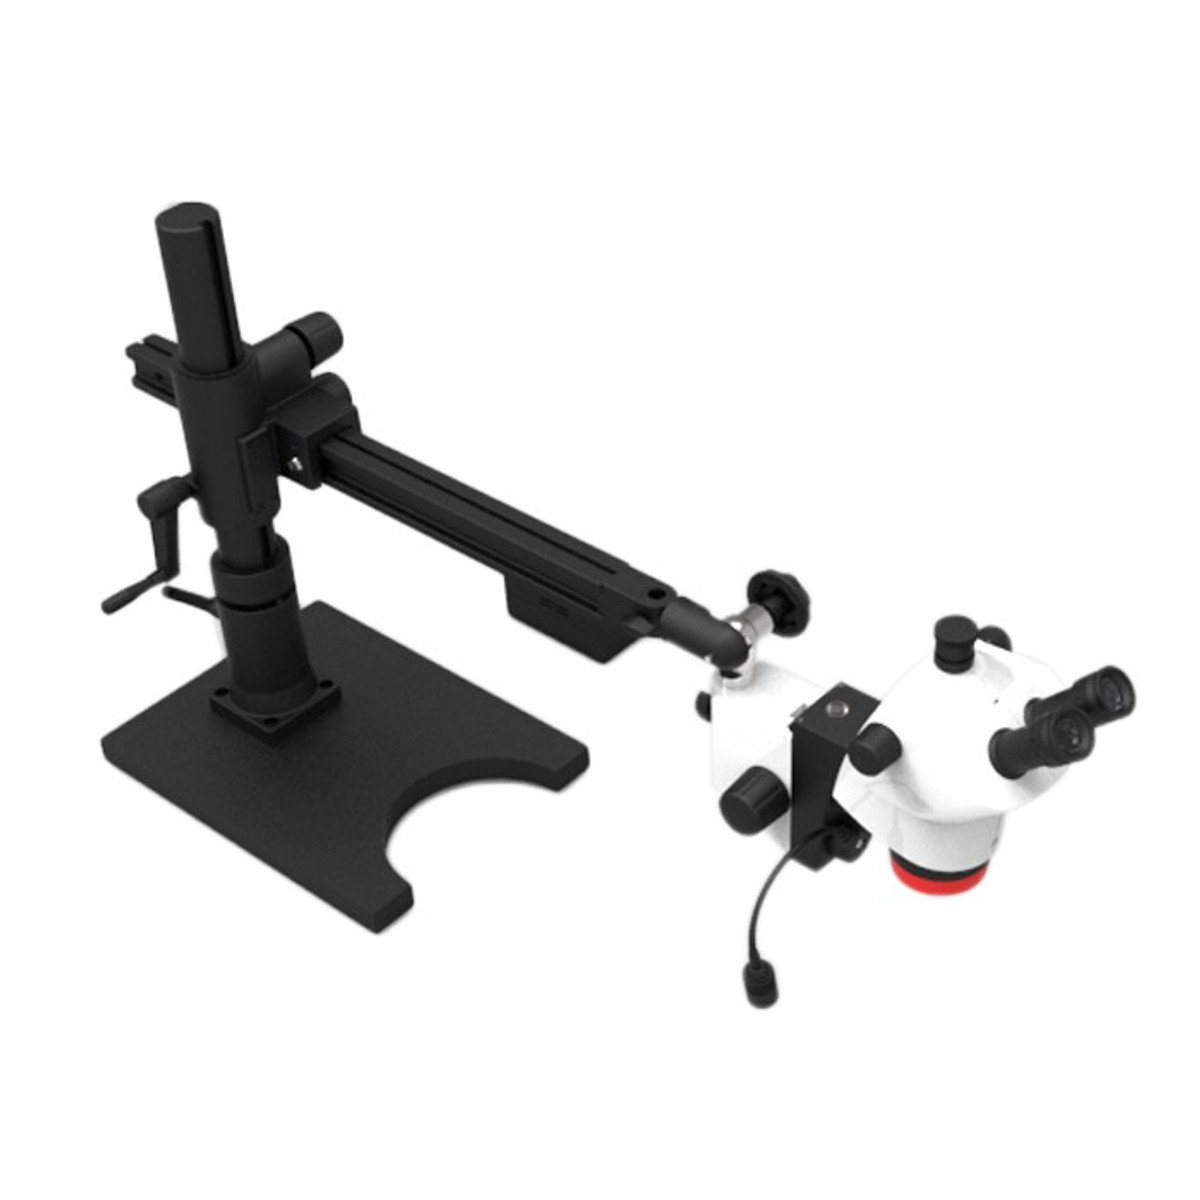 Labomed 4140400-800T Luxeo 6Z Trinocular Stereo Zoom Microscope on Heavy  Duty Swing Arm Stand, 8x to 50x Magnification